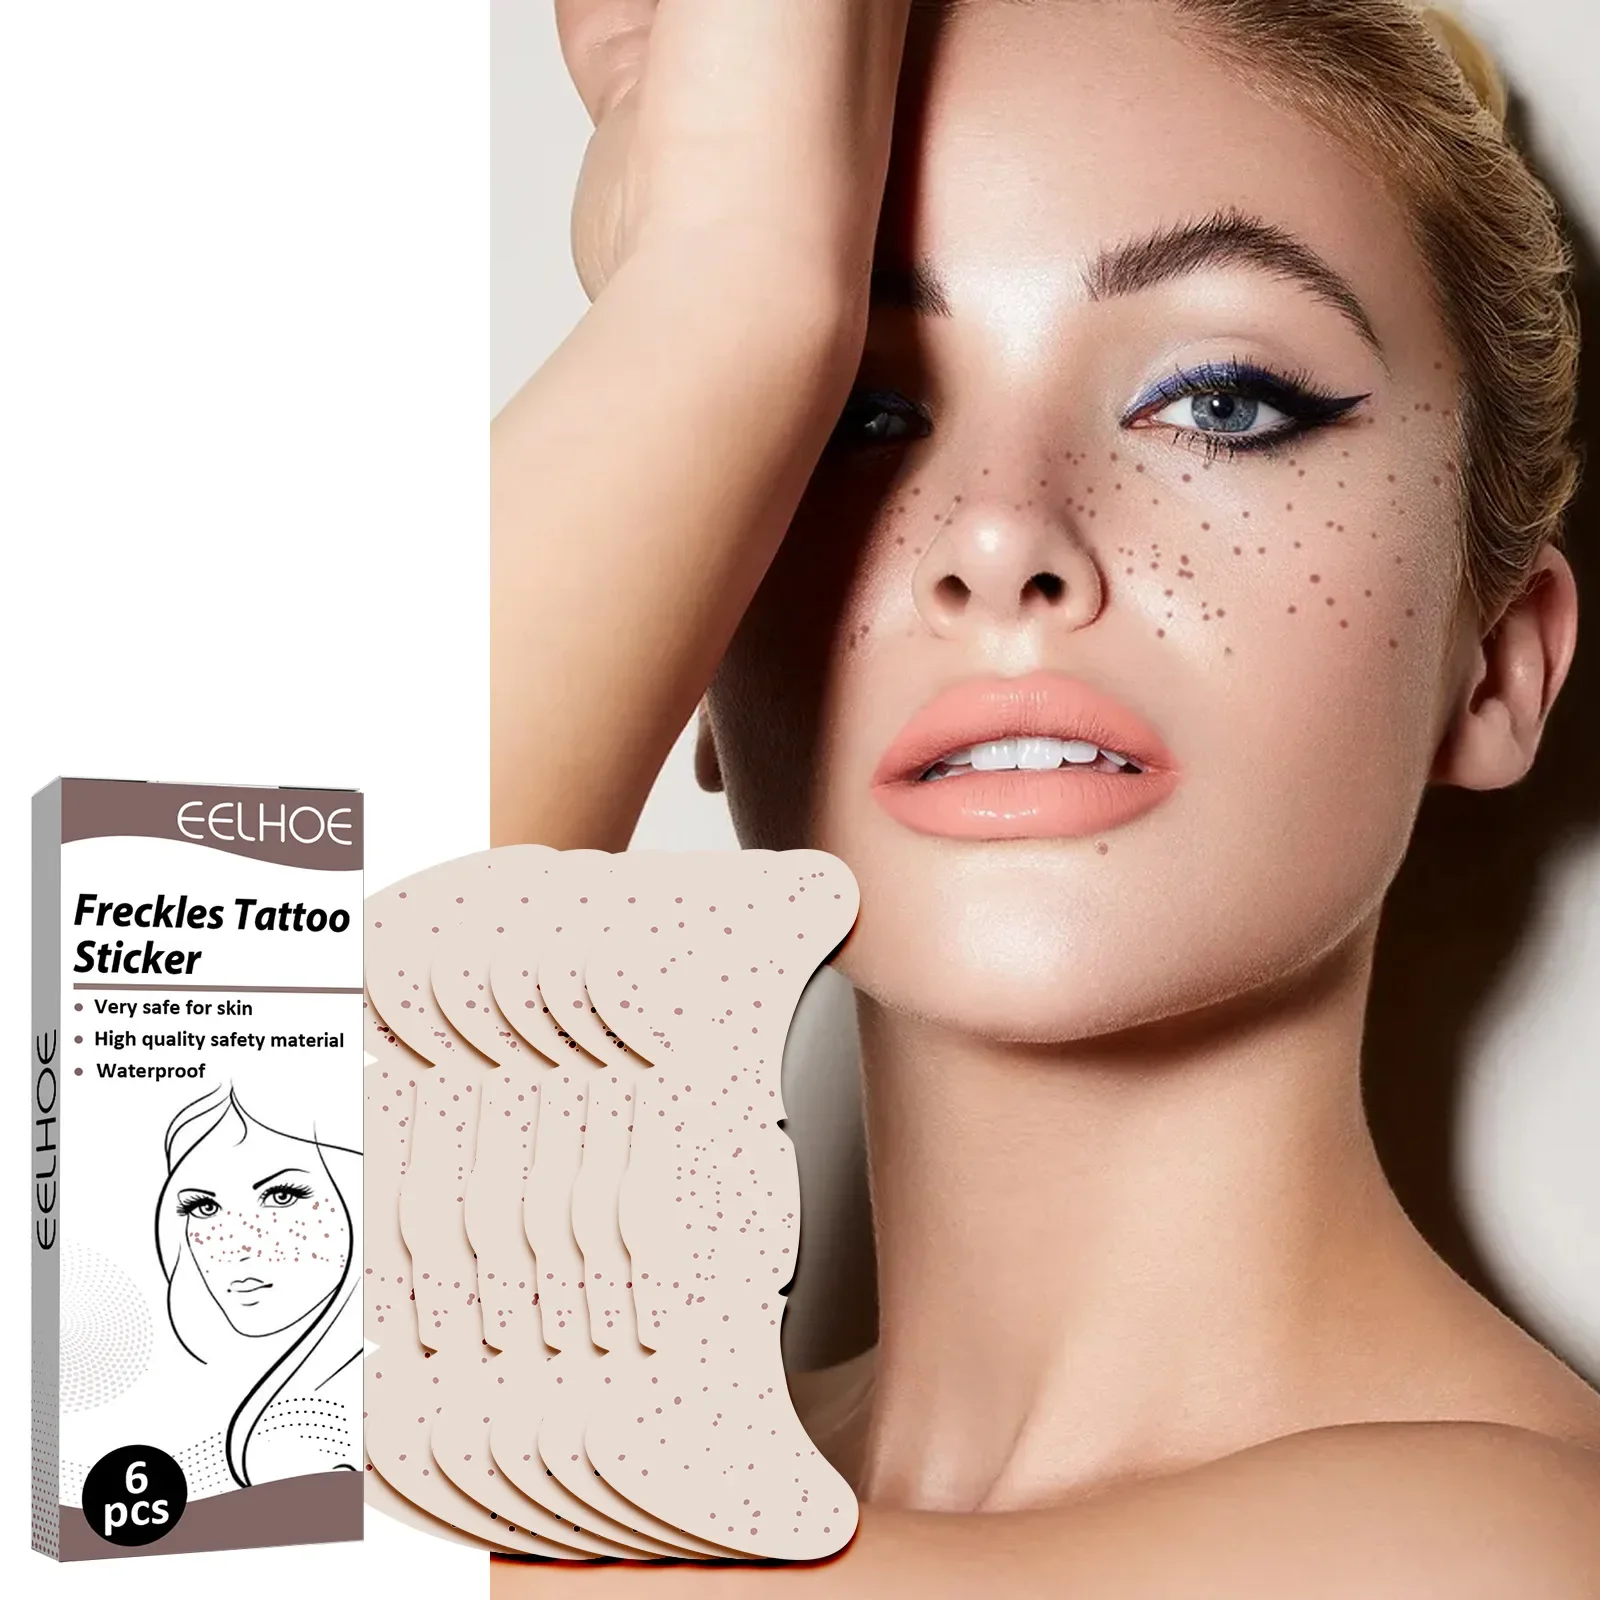 

6pcs Sexy Fake Freckles Tattoo Stickers Freckles Makeup Stickers Women Make Up Accessories Fashion Makeup Removable